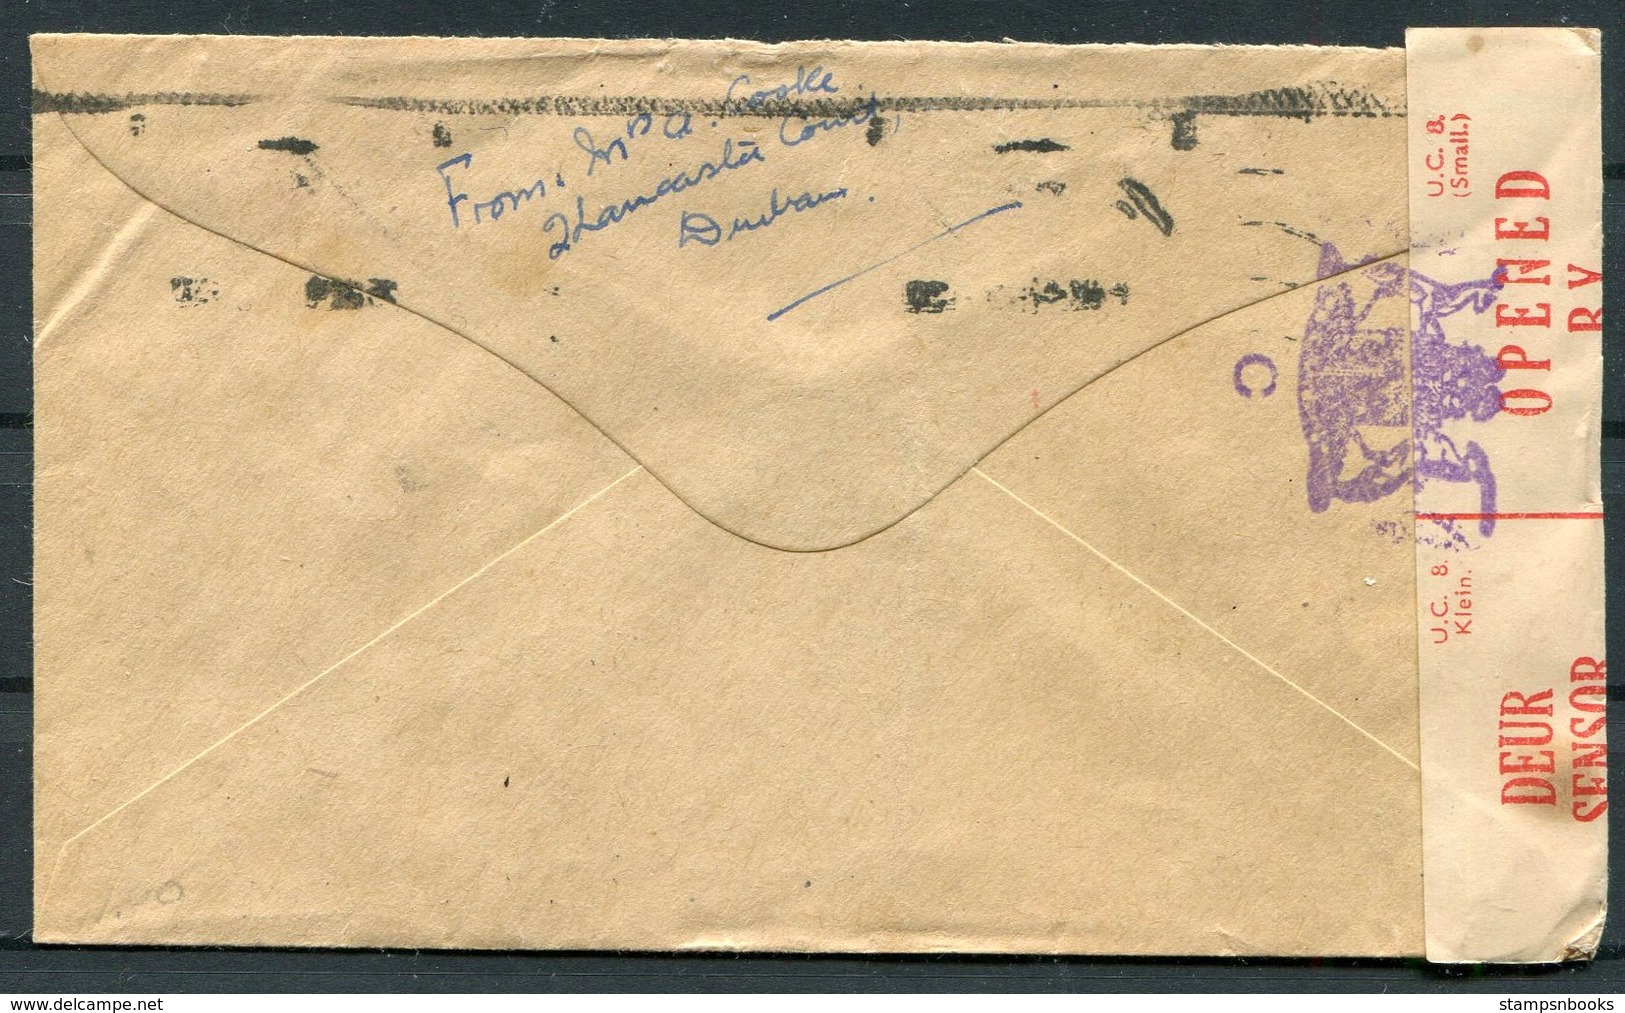 1944 South Africa Durban Censor Cover - General Church Military Service Commission, USA - Covers & Documents